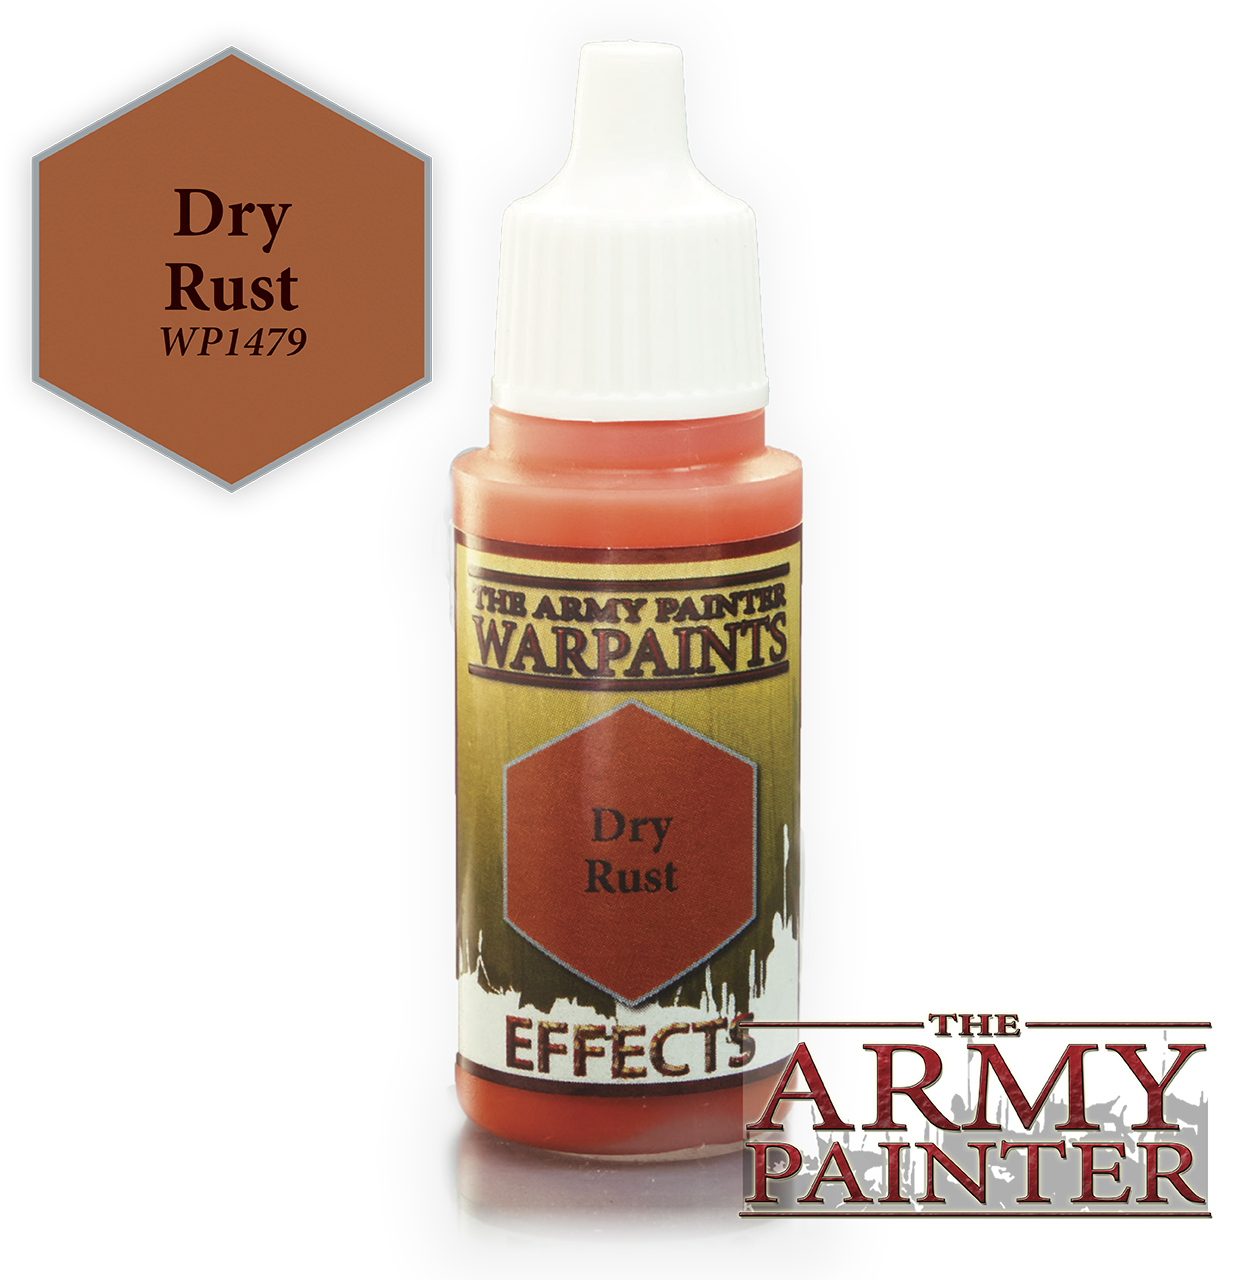 The ARMY PAINTER: Effects Warpaints - Dry Rust | Tacoma Games